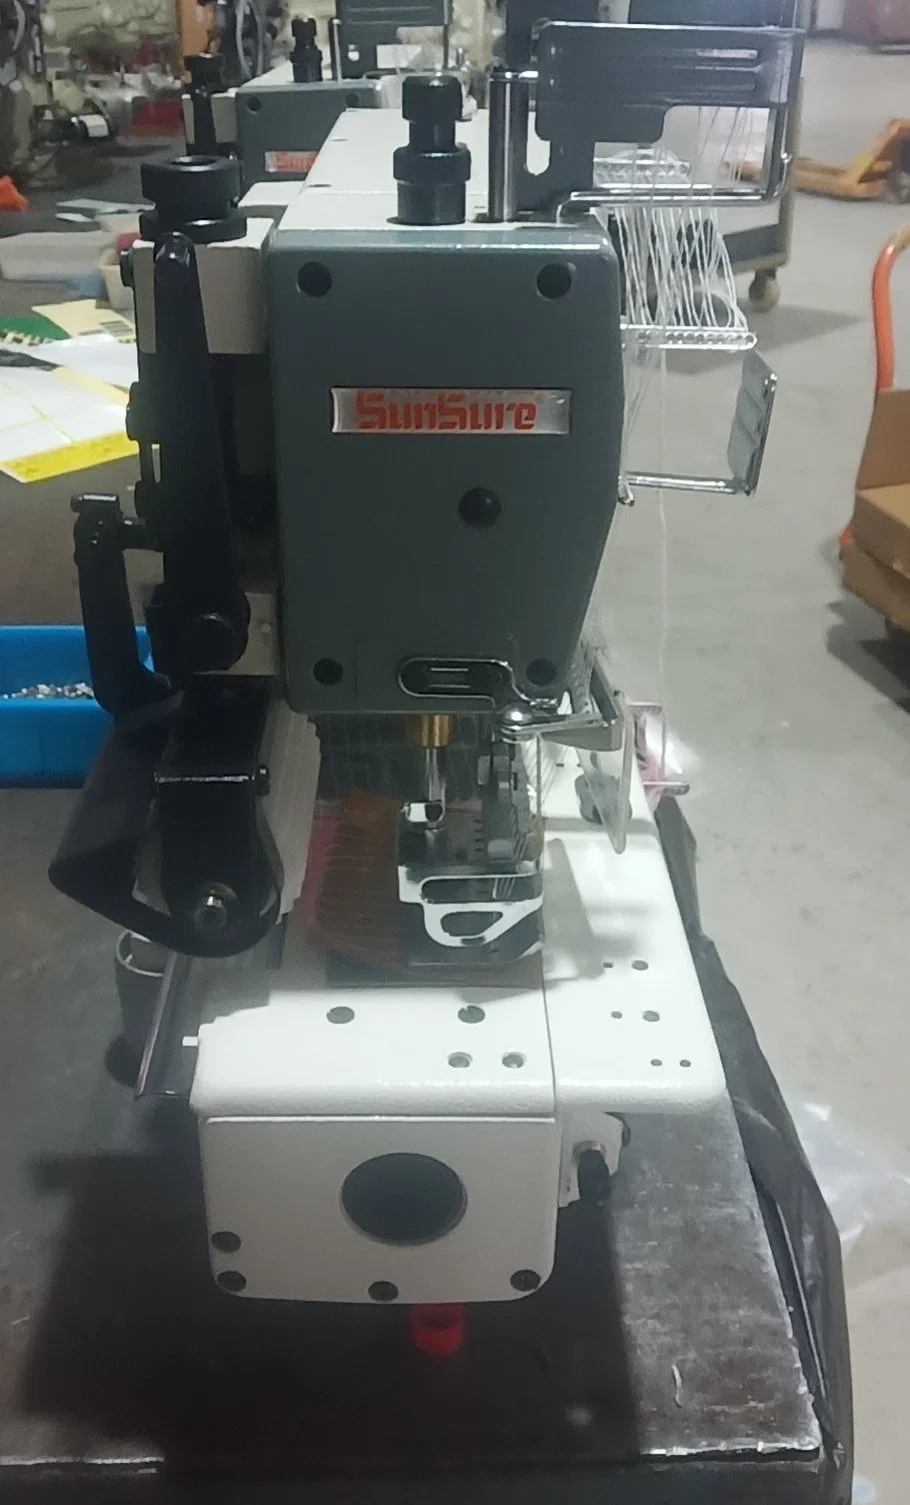 Multi Needle Optional Needle Position Sewing Machine with 13 Needles for General Sewing Ss-008-13032p